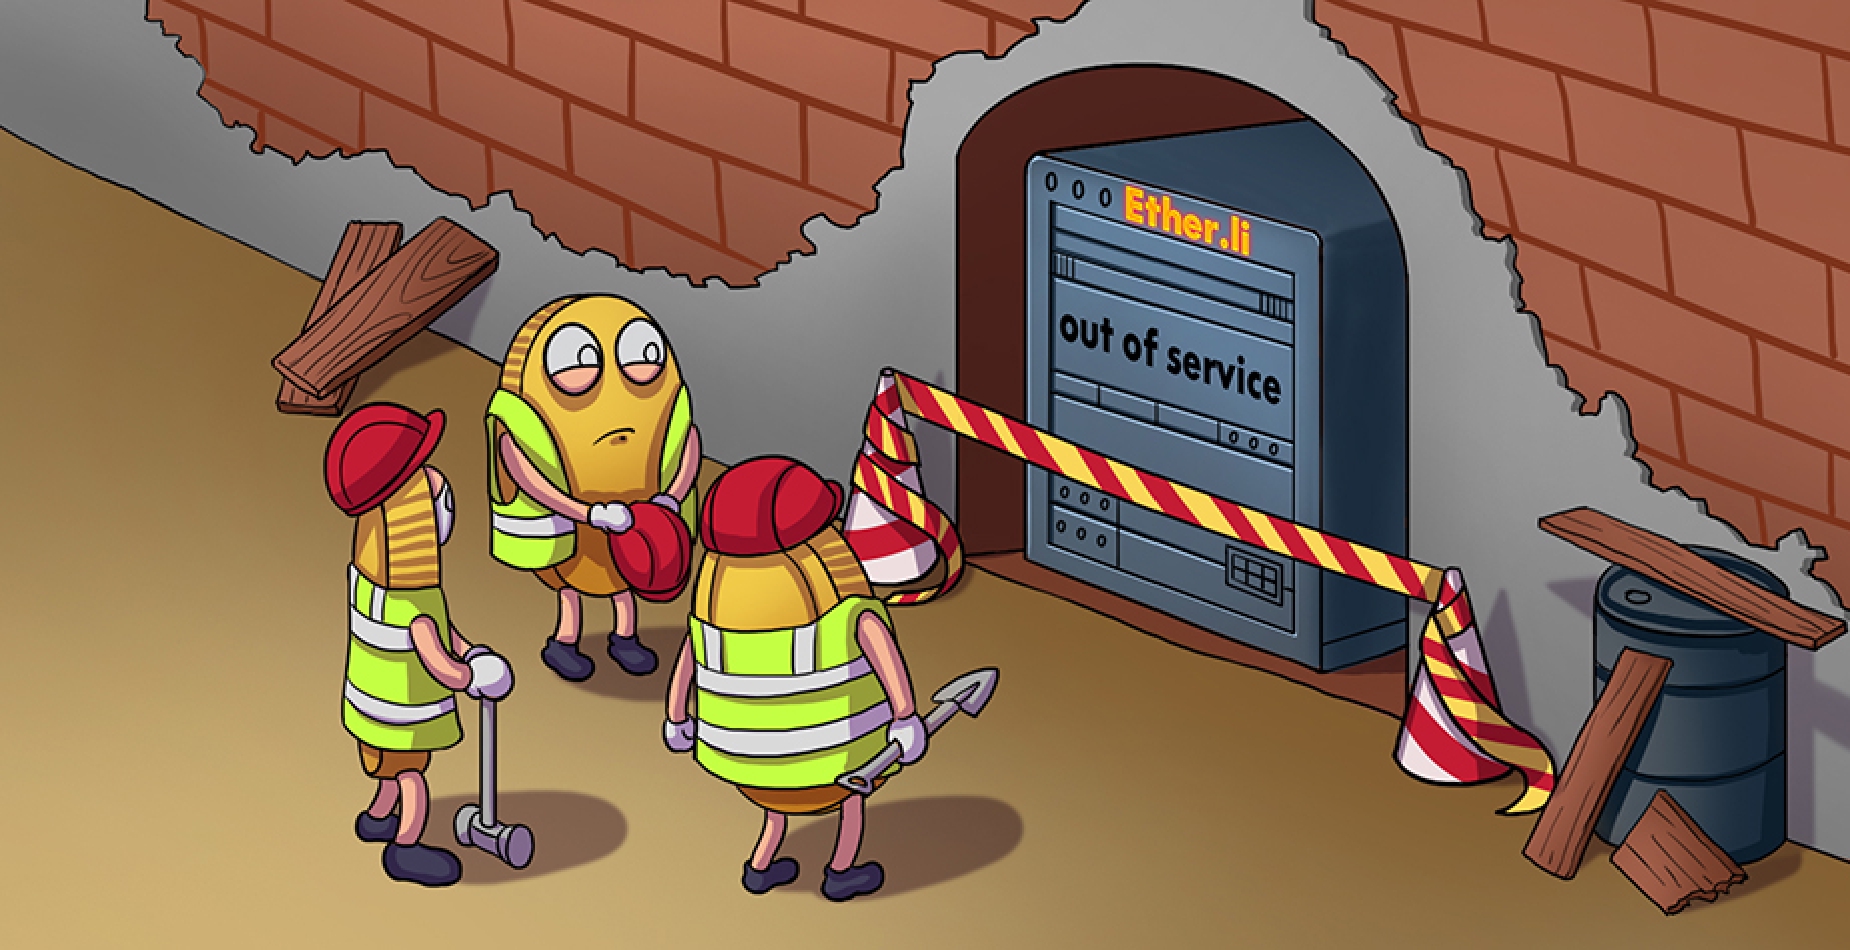 Three construction workers looking quizzically at the ether.li server rack that displays the message "out of service".